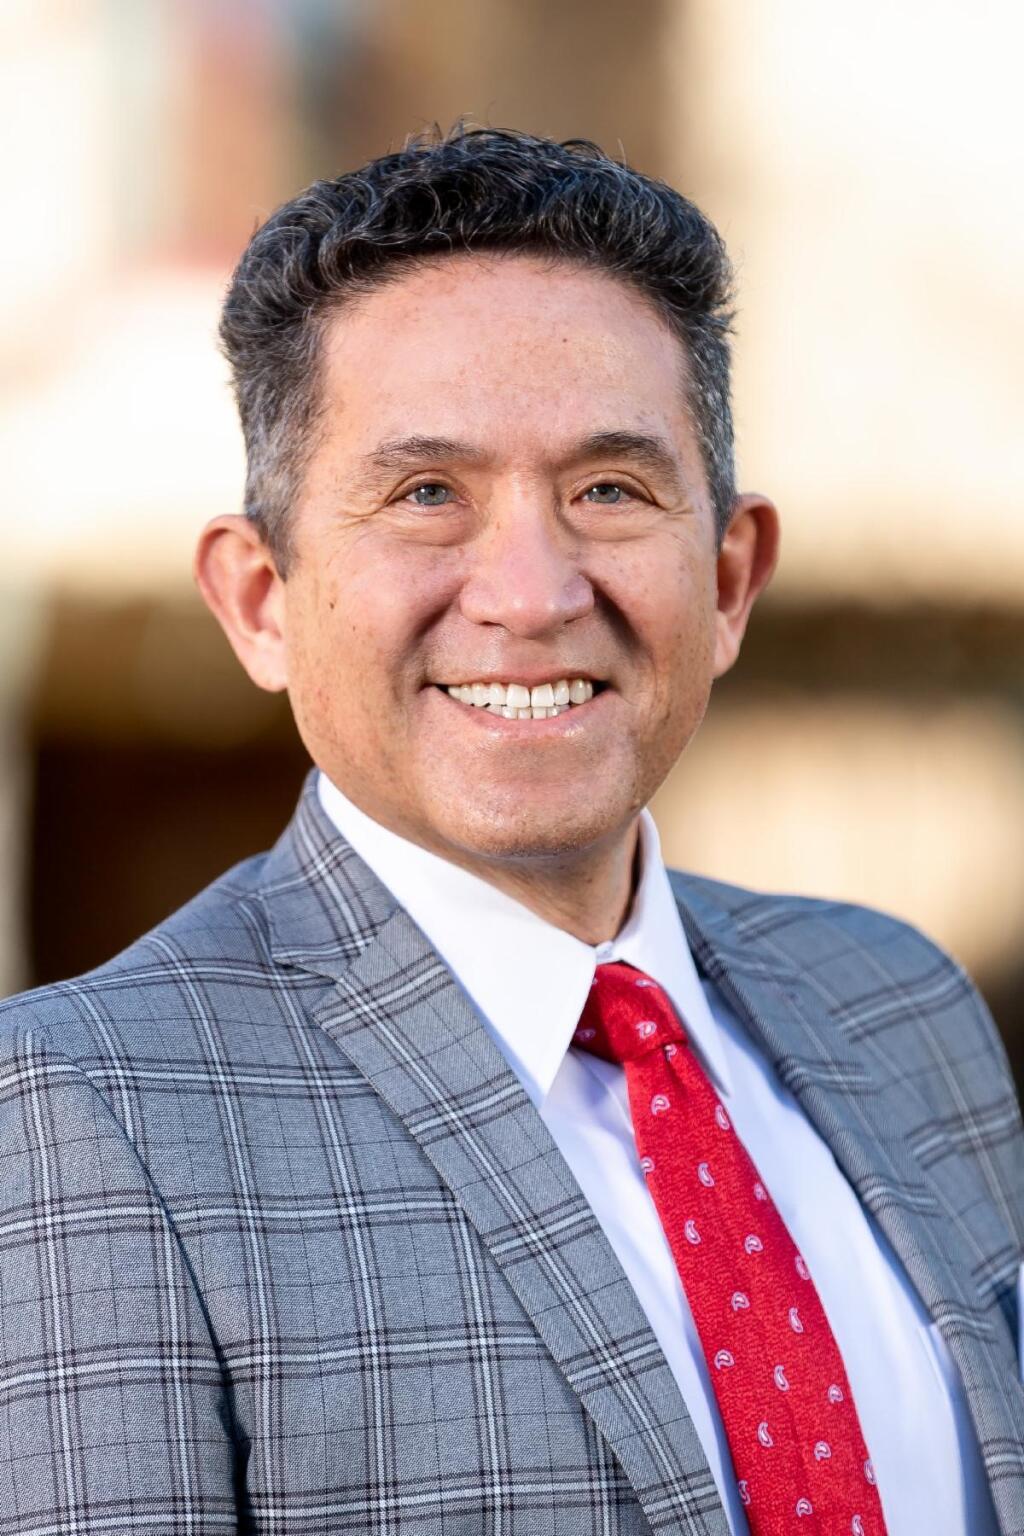 Percy Brandon, general manager of Vintners Resort, which includes John Ash & Co. and River Vine restaurants, The Front Room Bar & Lounge and Vi La Vita Spa in north Santa Rosa. (courtesy of Vintners Resort)